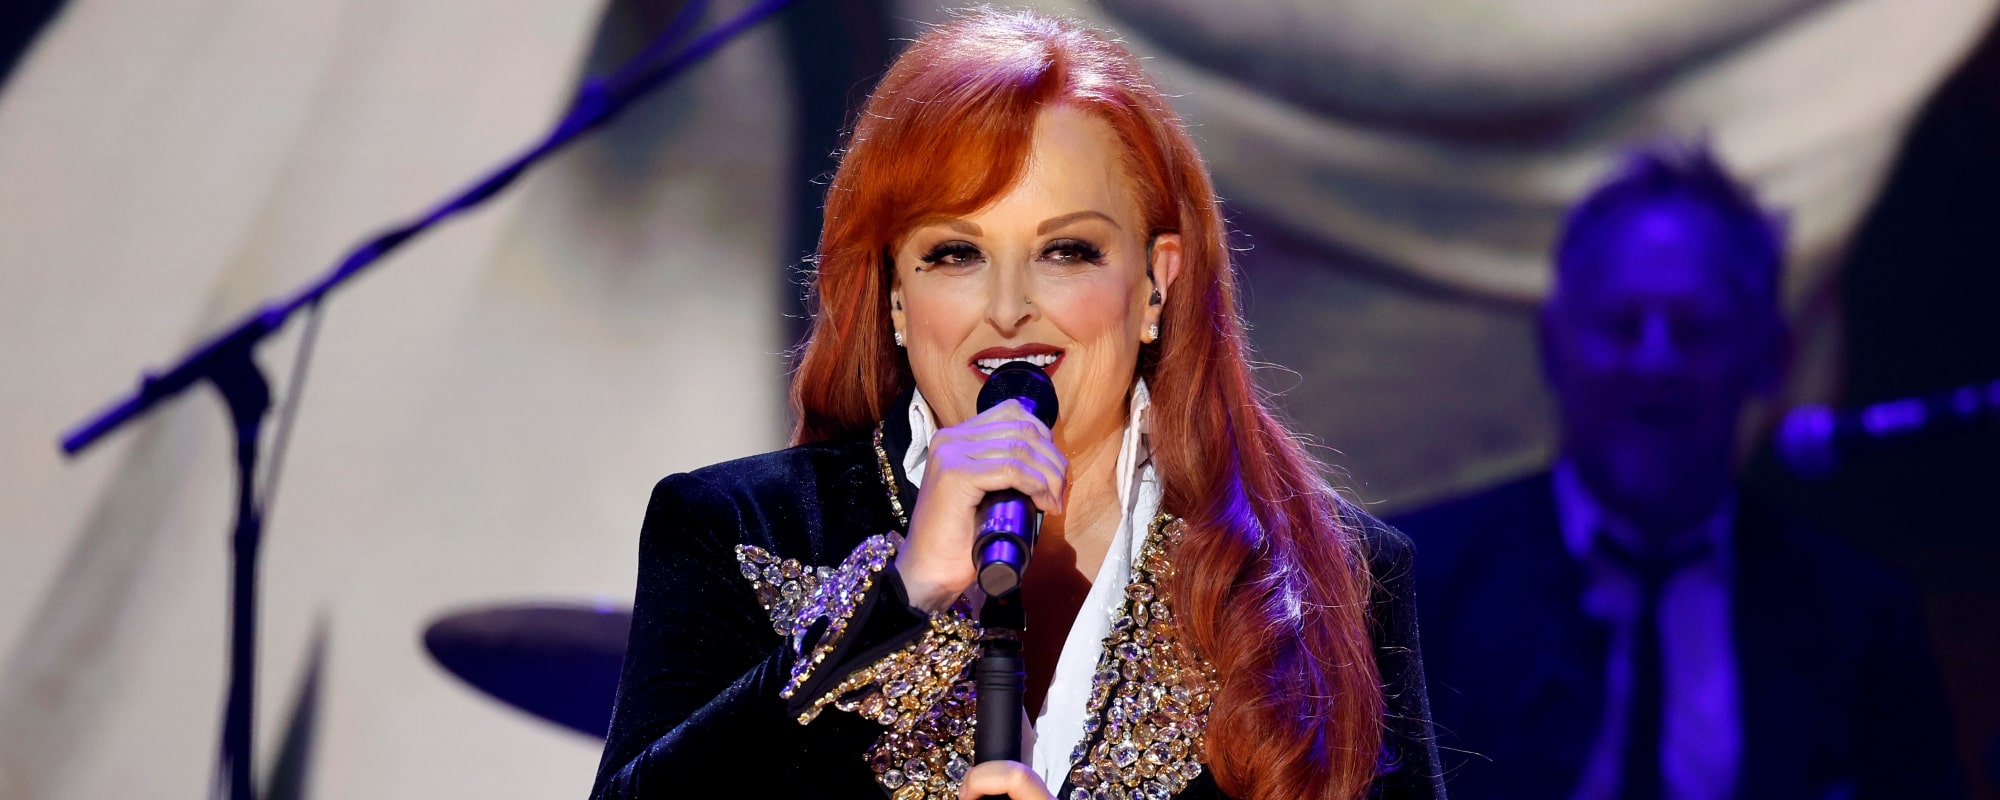 Watch Wynonna Judd Honor Patsy Cline With “Crazy” Performance at the Ryman Auditorium